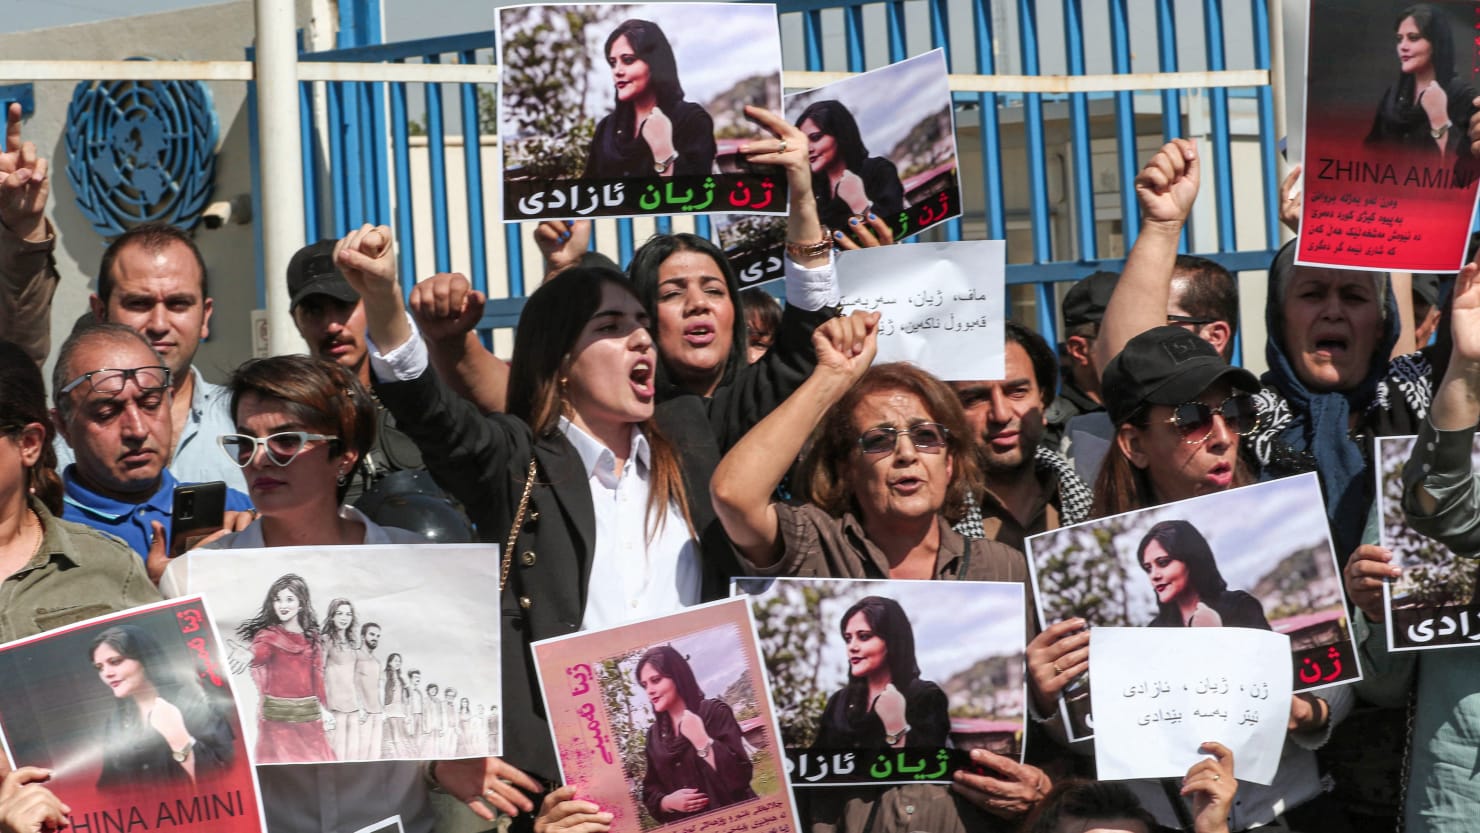 Iranian women and some men protest while holding images of a woman who was killed in police custody.